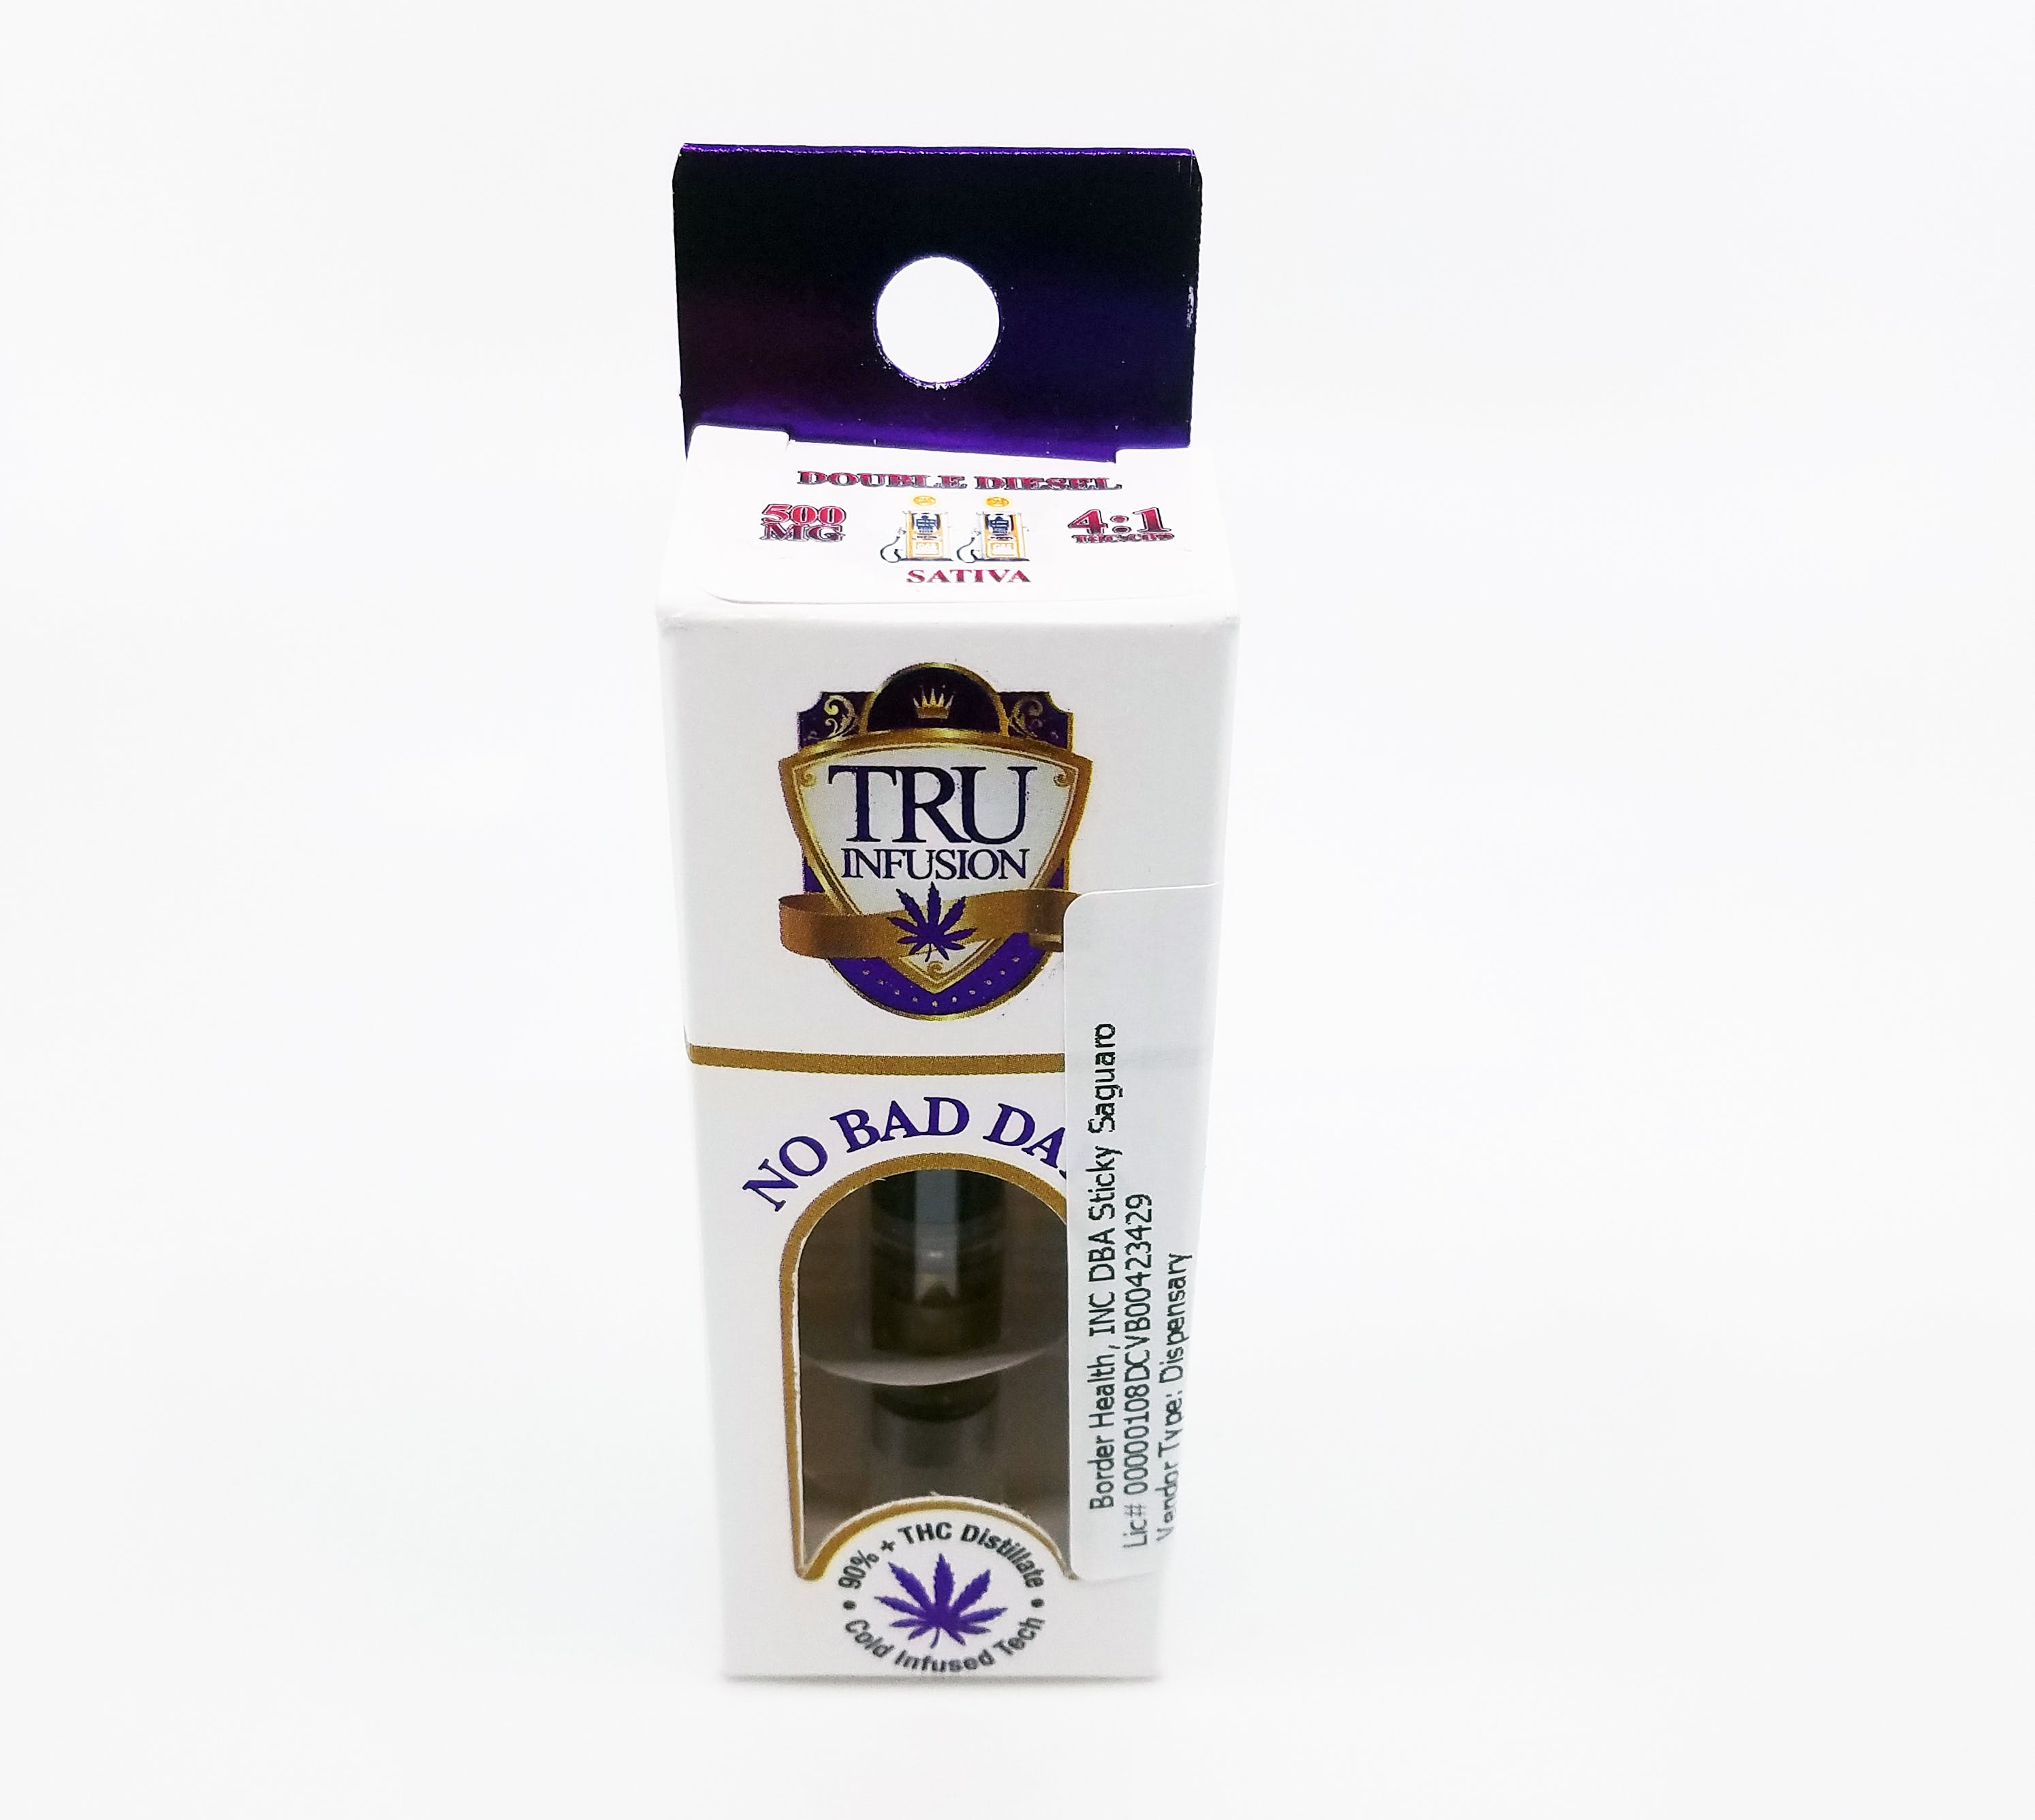 concentrate-tru-infusion-41-double-diesel-s-500mg-cartridge